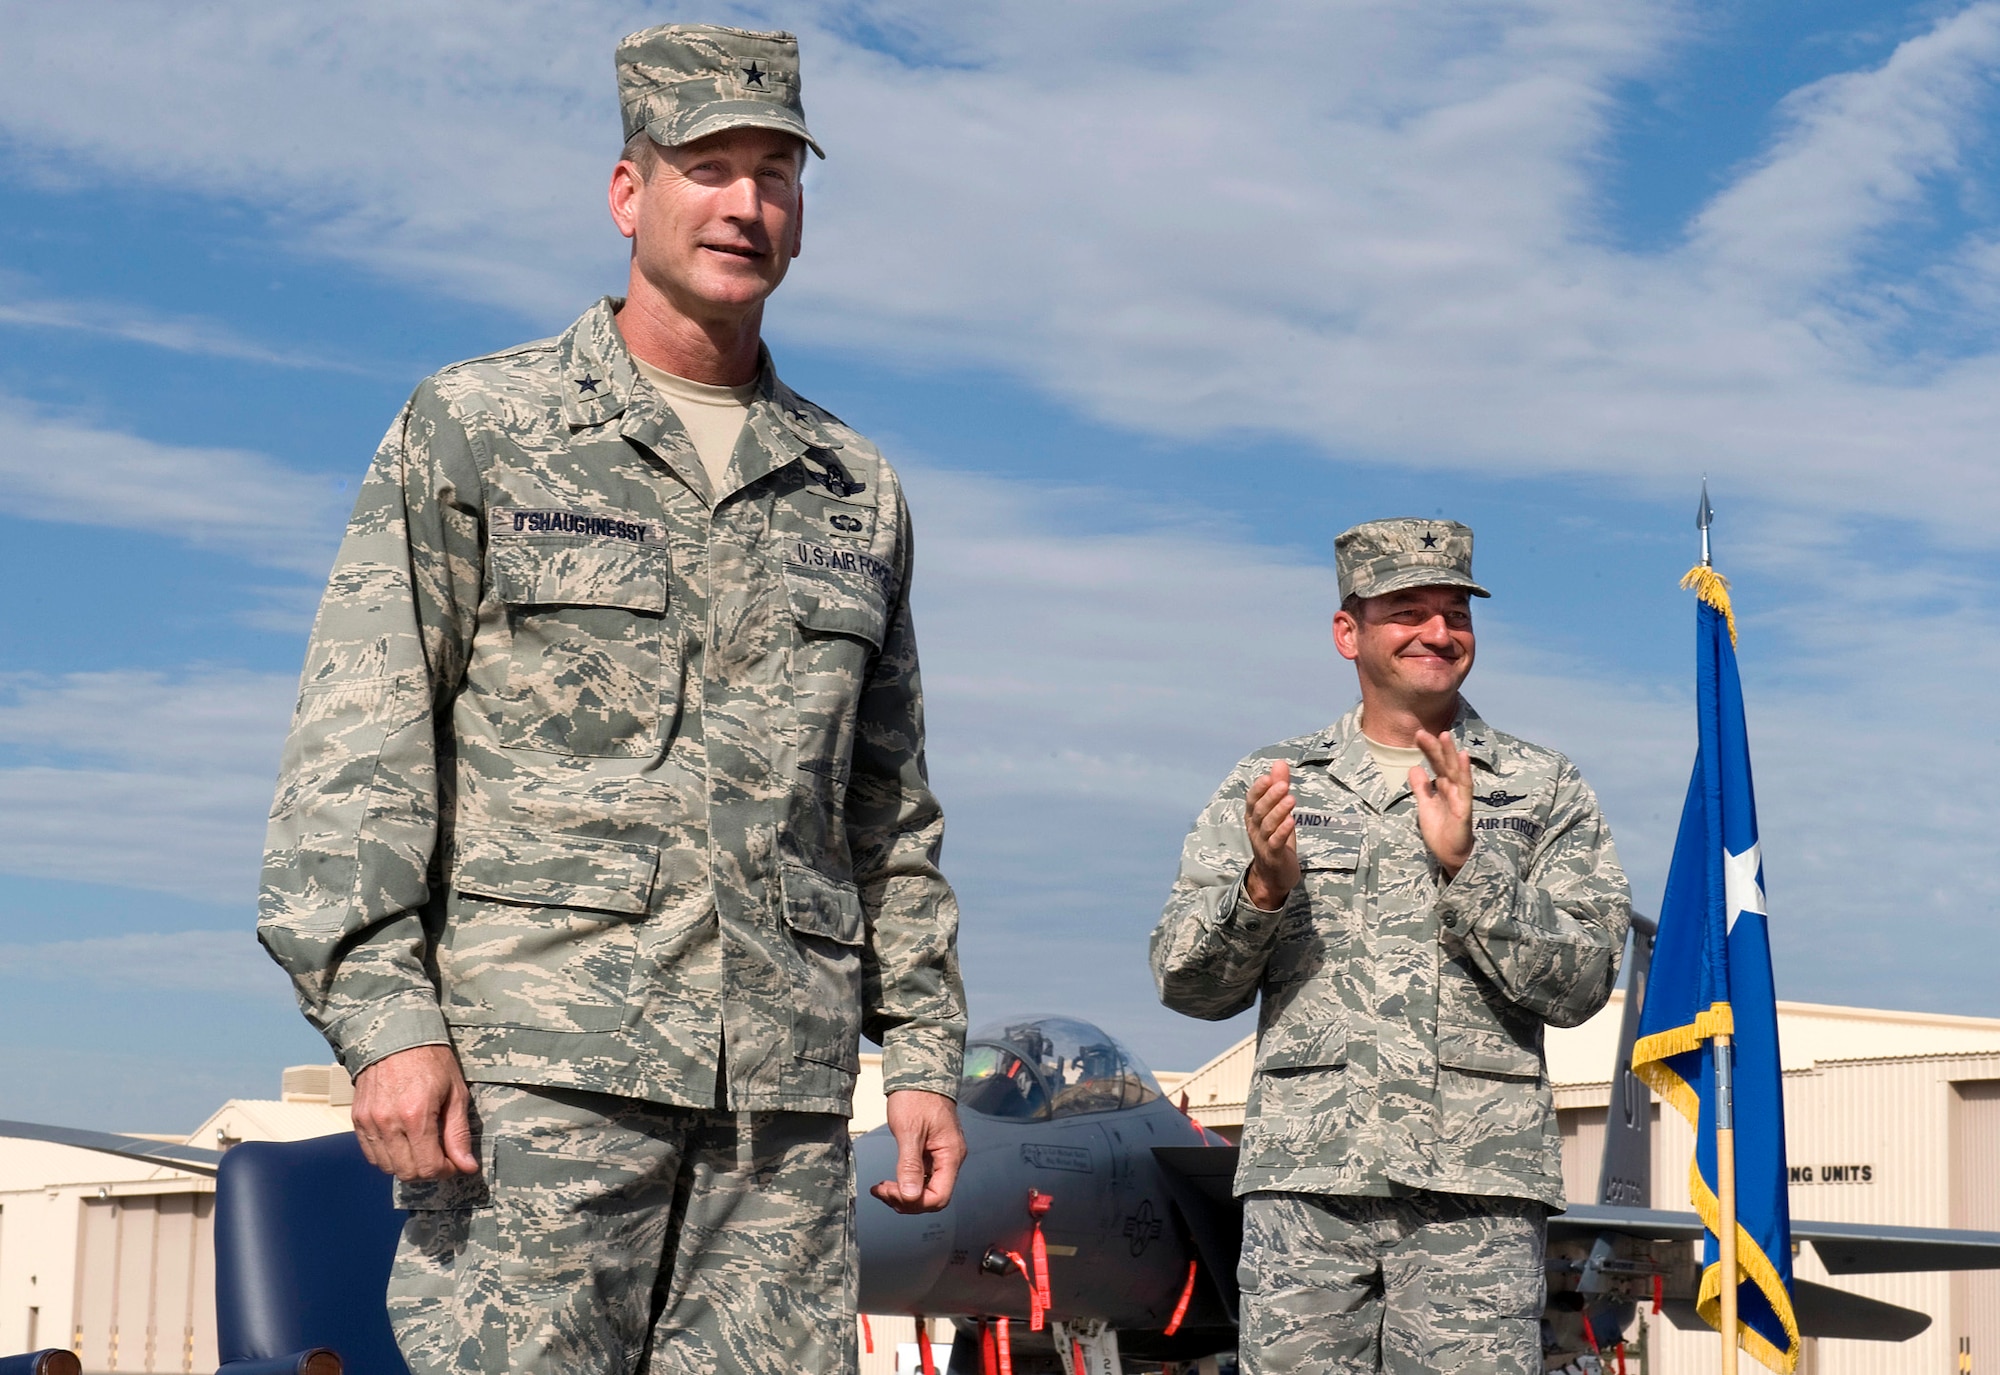 NELLIS AIR FORCE BASE, Nev.-- Brig. Gen. Terrence O'Shaughnessy, the new 57th Wing commander, stands with Brig. Gen. Russell J. Handy, the former wing commander, at the change of command ceremony July 16. The 57th Wing is responsible for 38 squadrons at 12 installations, constituting the Air Force's most diverse flying wing, flying and maintaining more than 130 aircraft. The 57th Wing also oversees the U.S. Air Force Weapons School; U.S. Air Force Air Demonstration Squadron, the Thunderbirds; and the Red Flag and Green Flag exercises. (U.S. Air Force Photo by Airman 1st Class Brett Clashman)